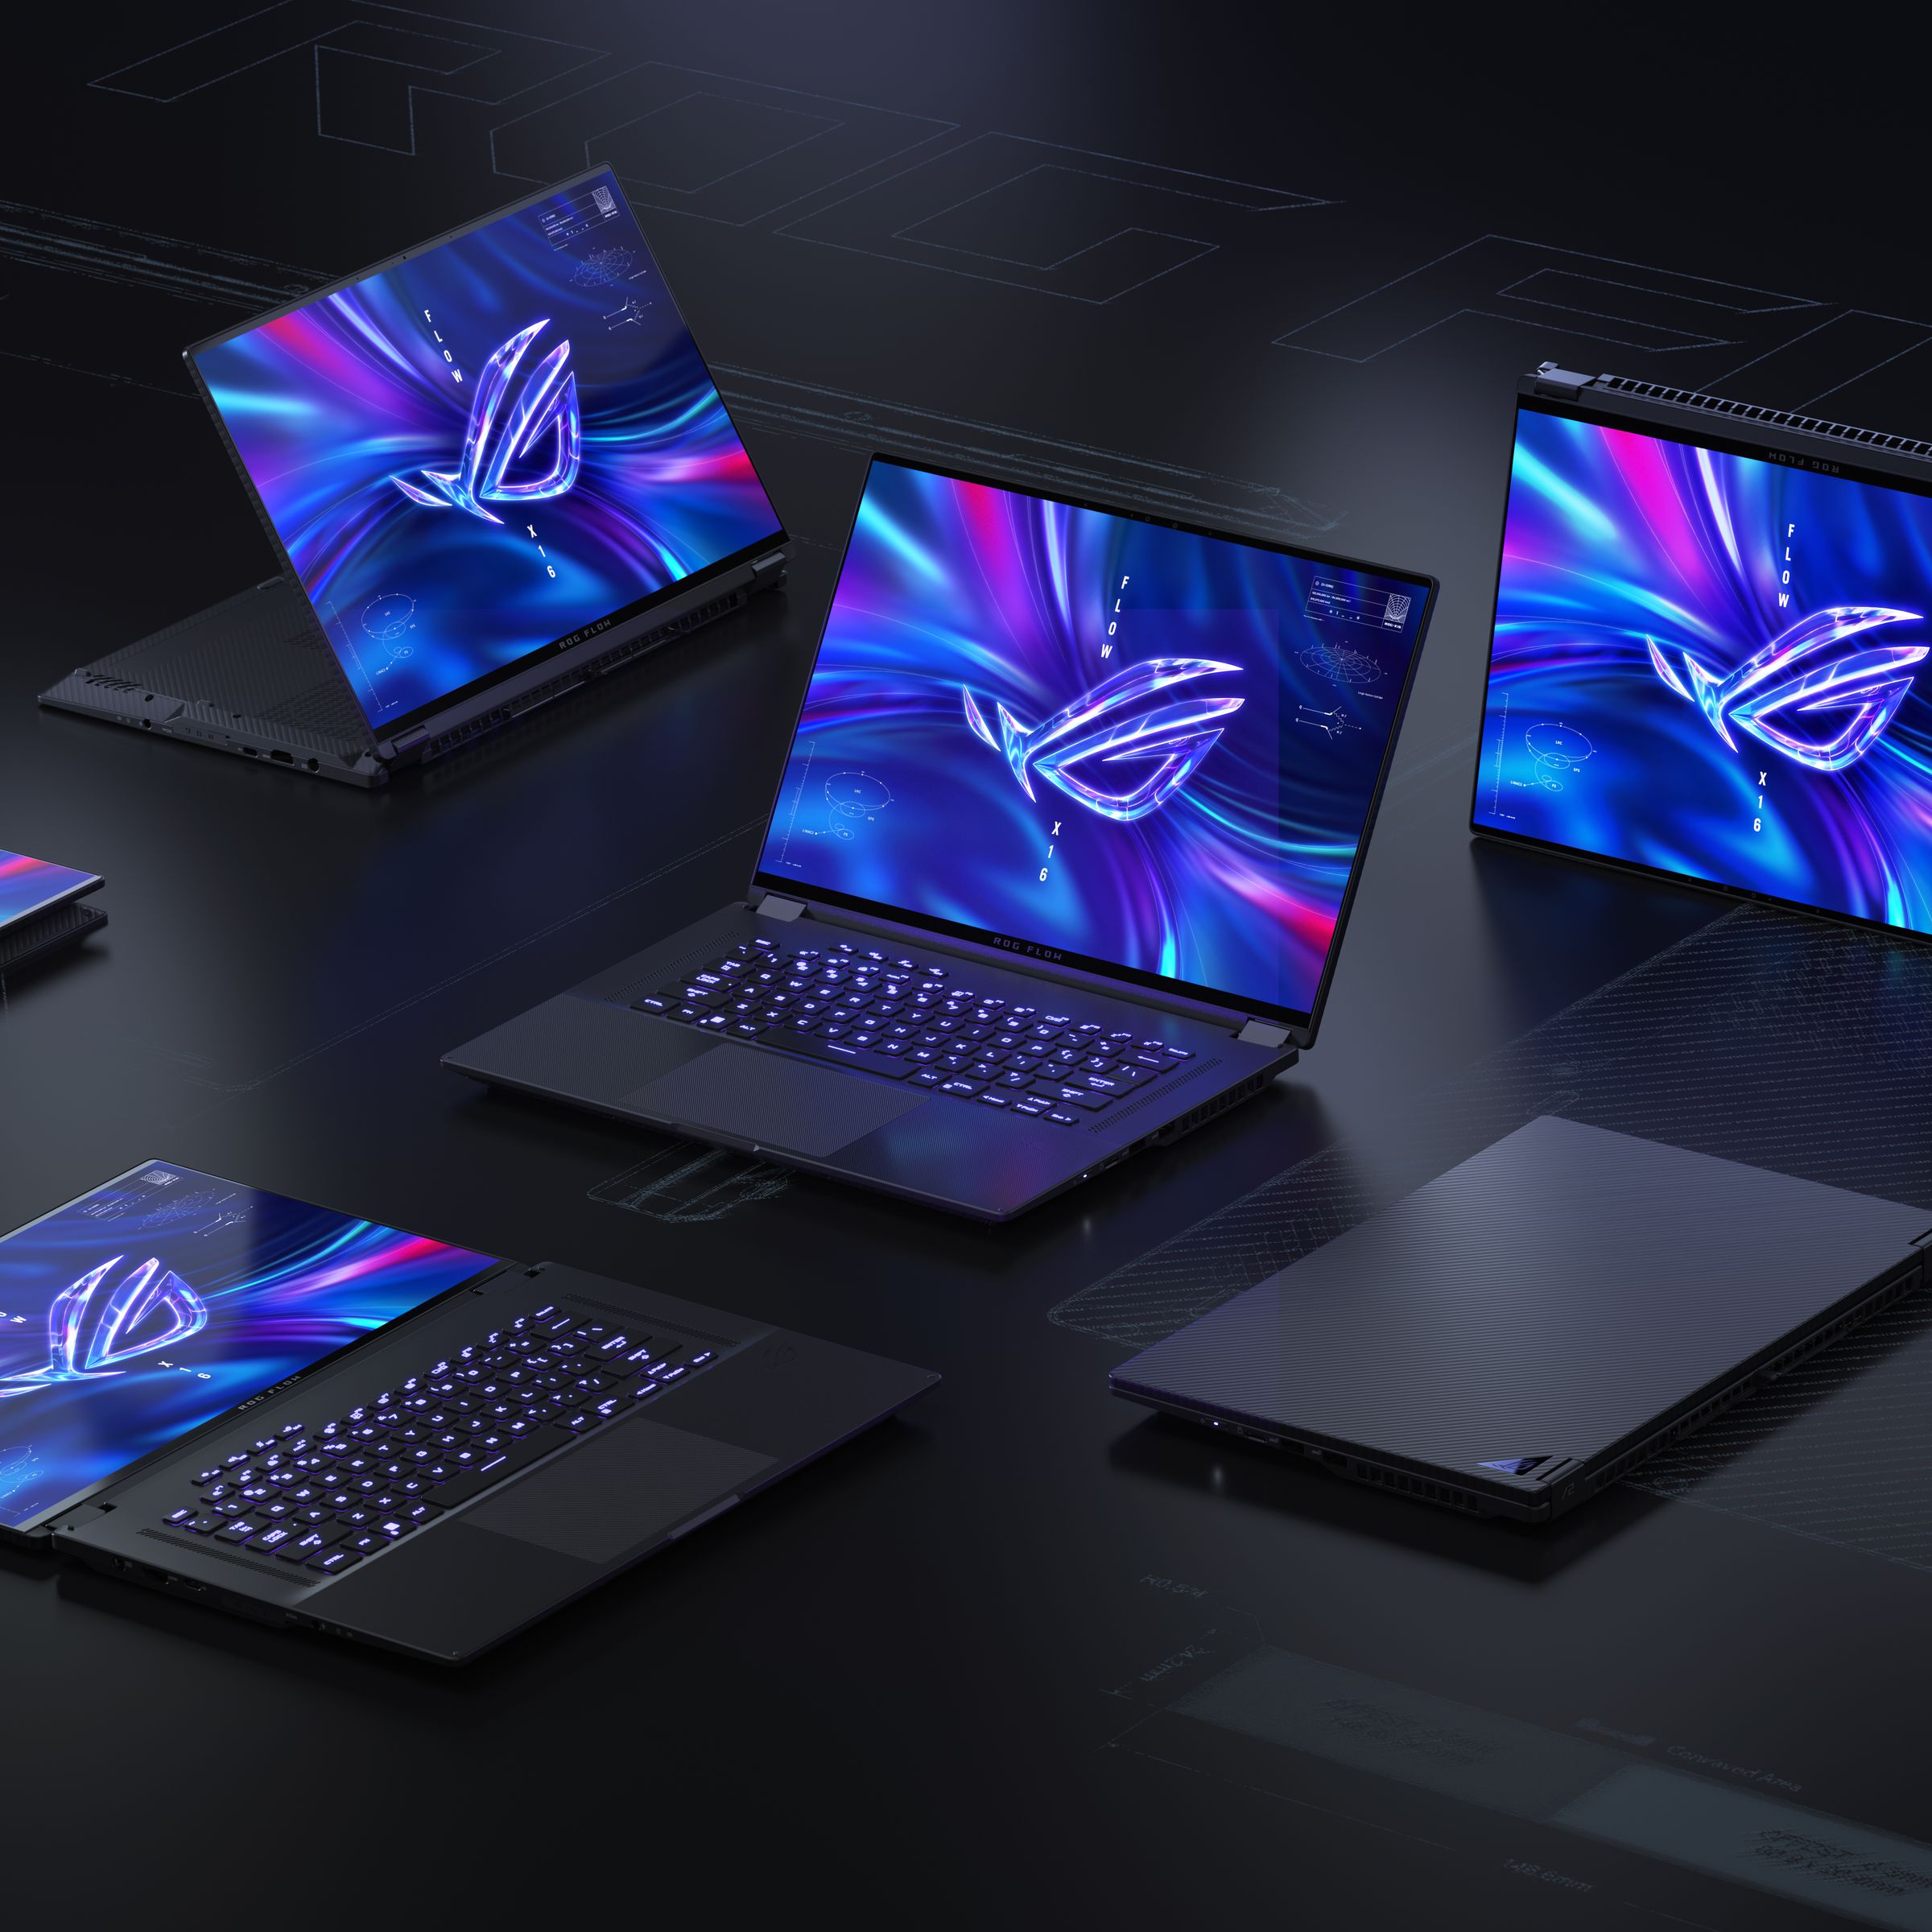 The ROG Flow X16 is just one of three convertible laptops Asus showed off at CES 2023.